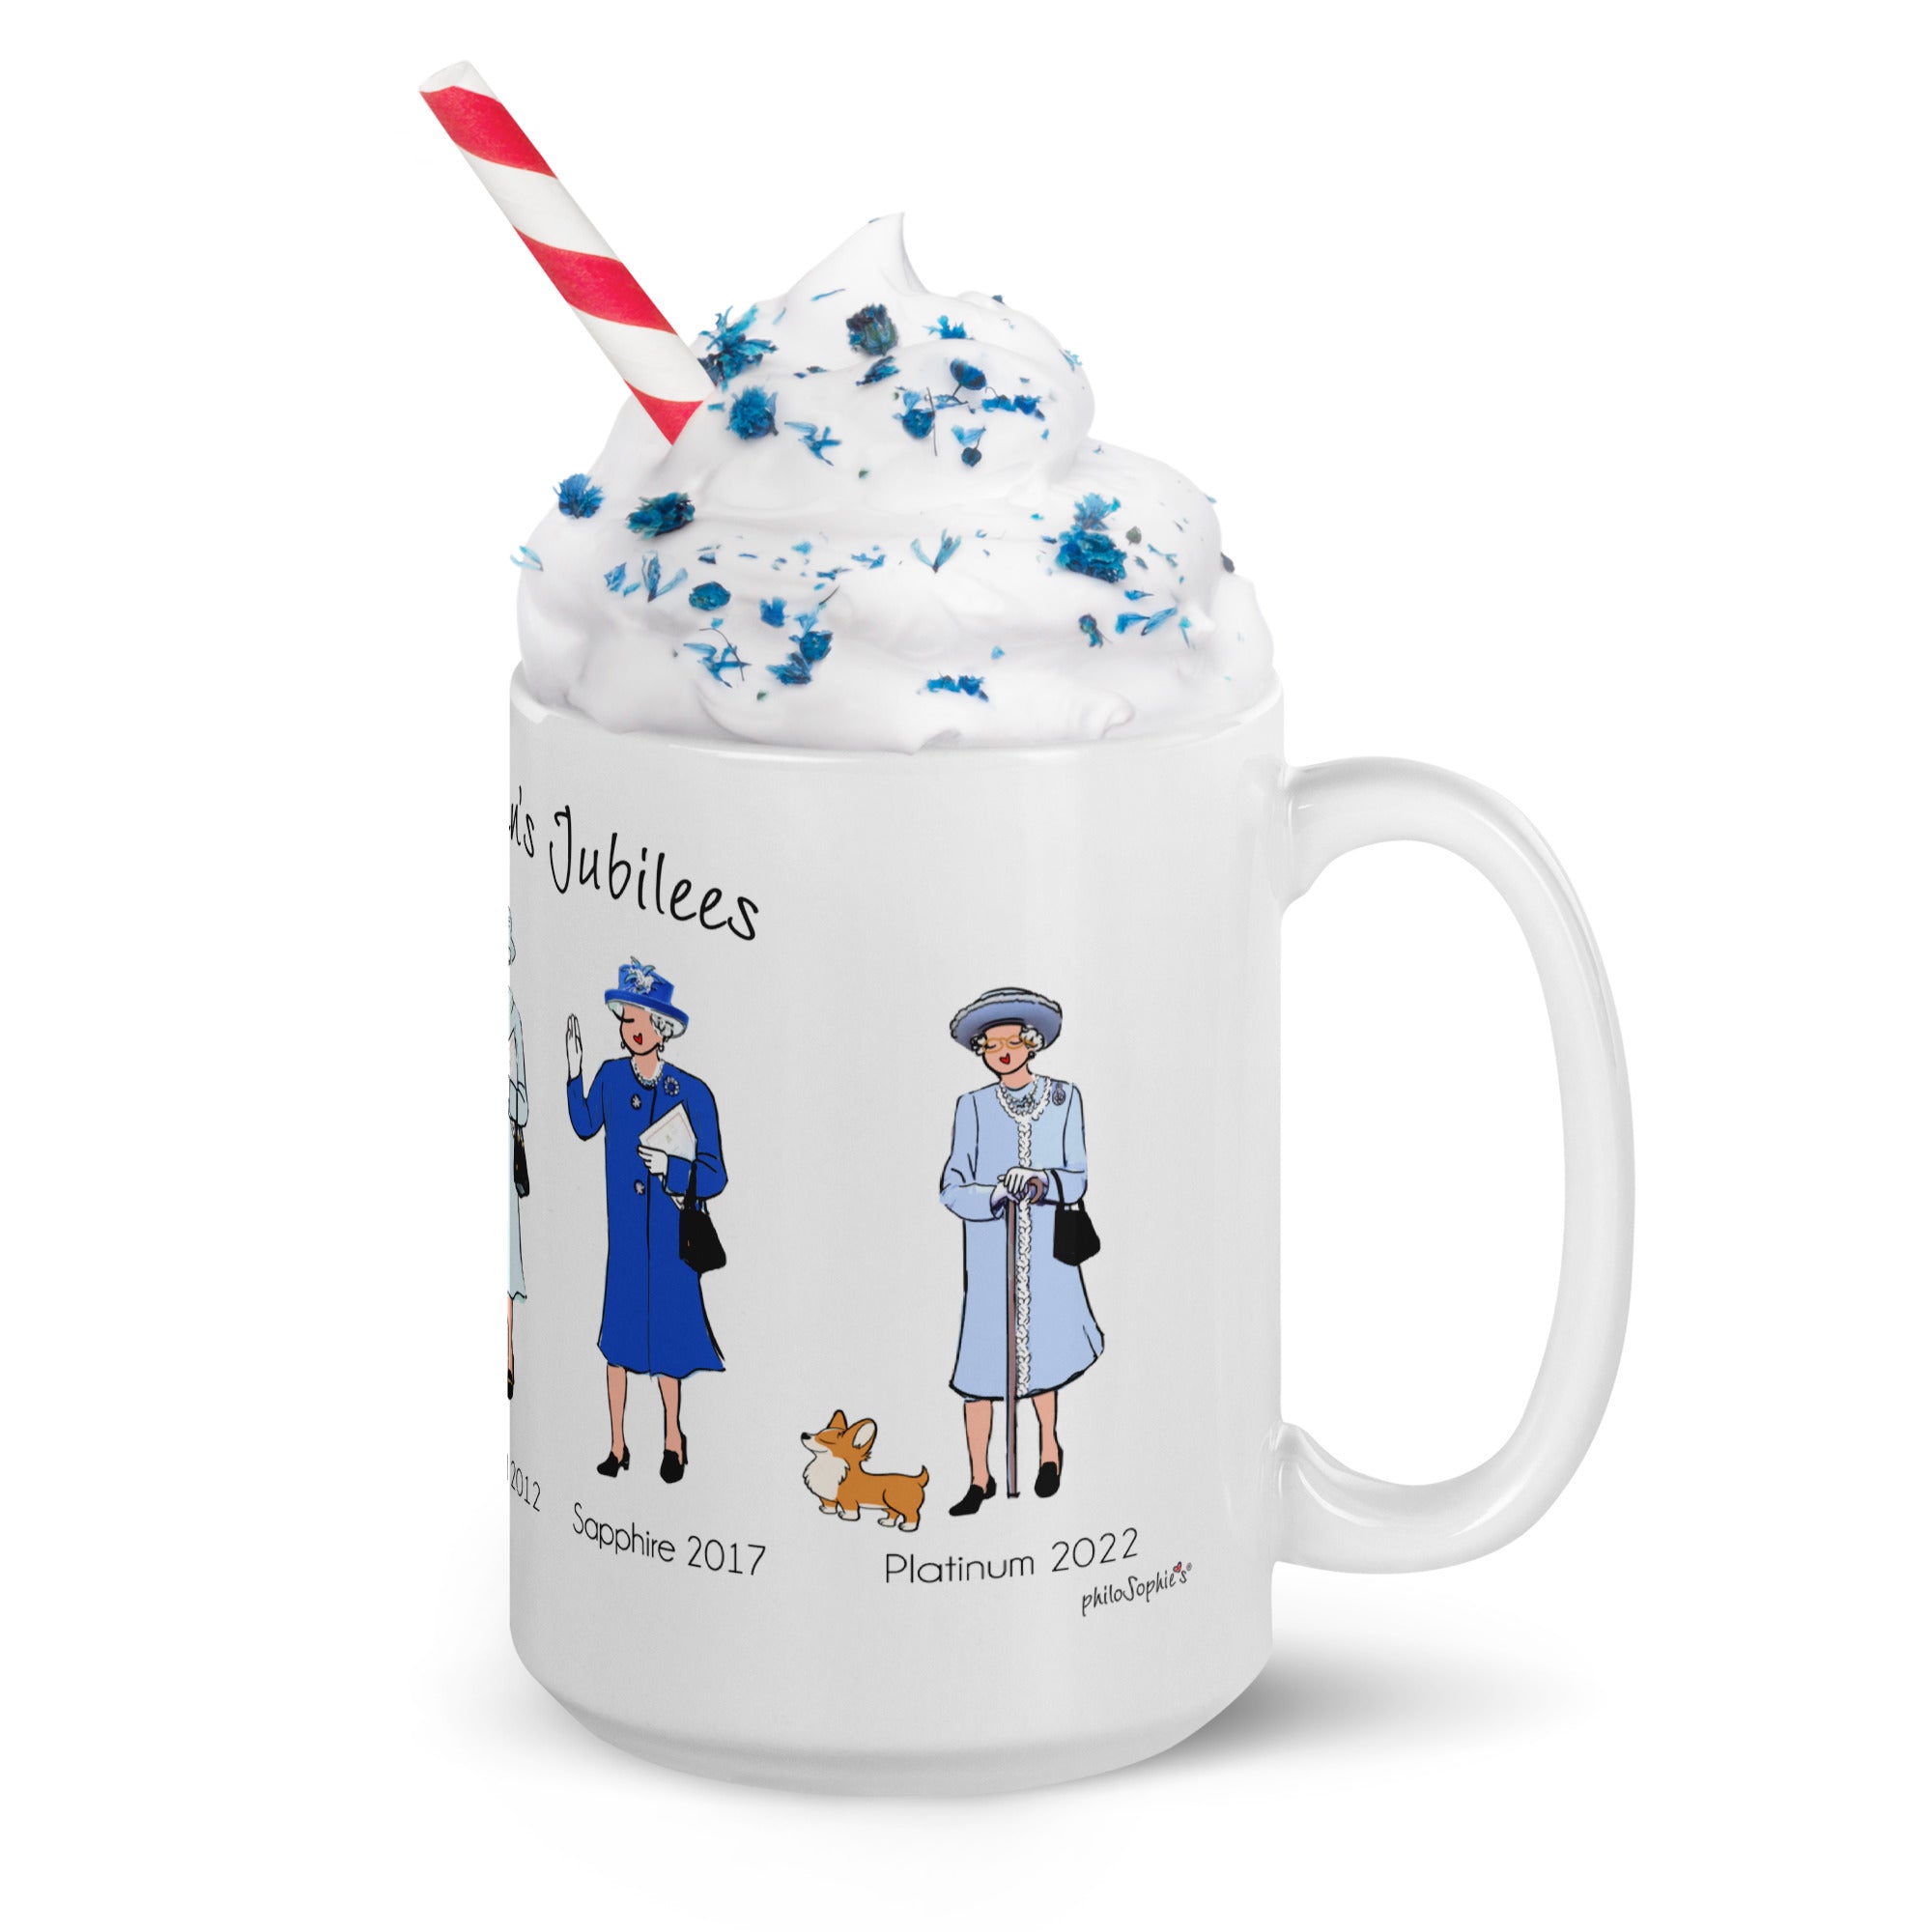 The Queen's Jubilees 15 ounce Ceramic Mug